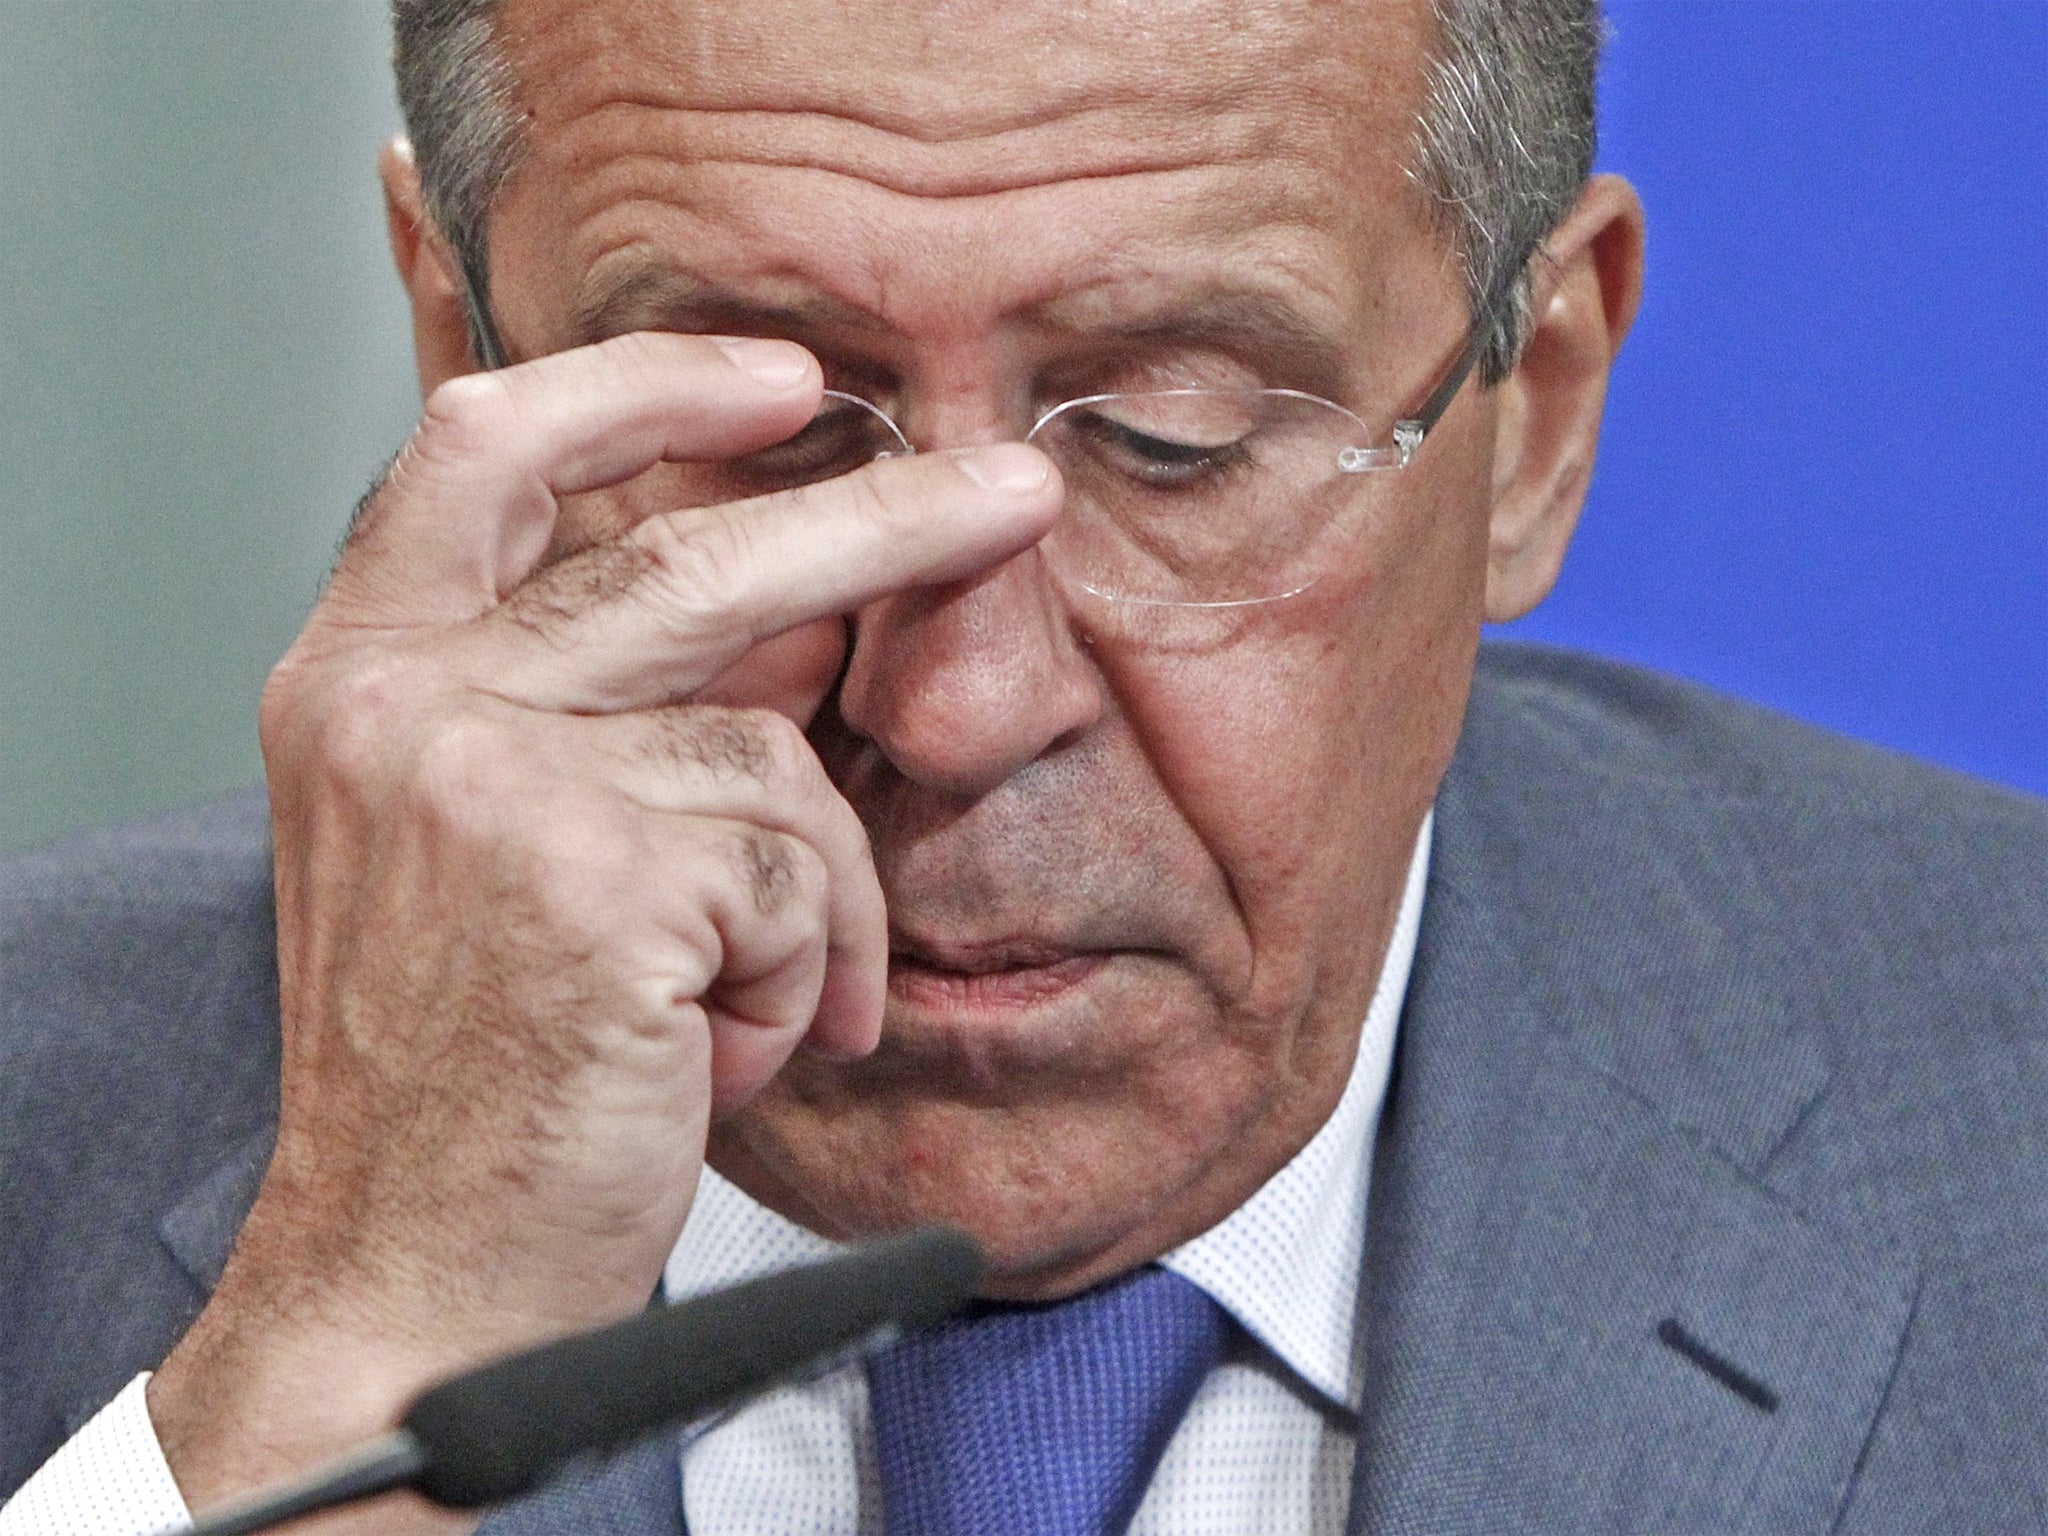 Russian foreign minister Sergei Lavrov reached a deal with the US in Geneva, but French meetings made less progress